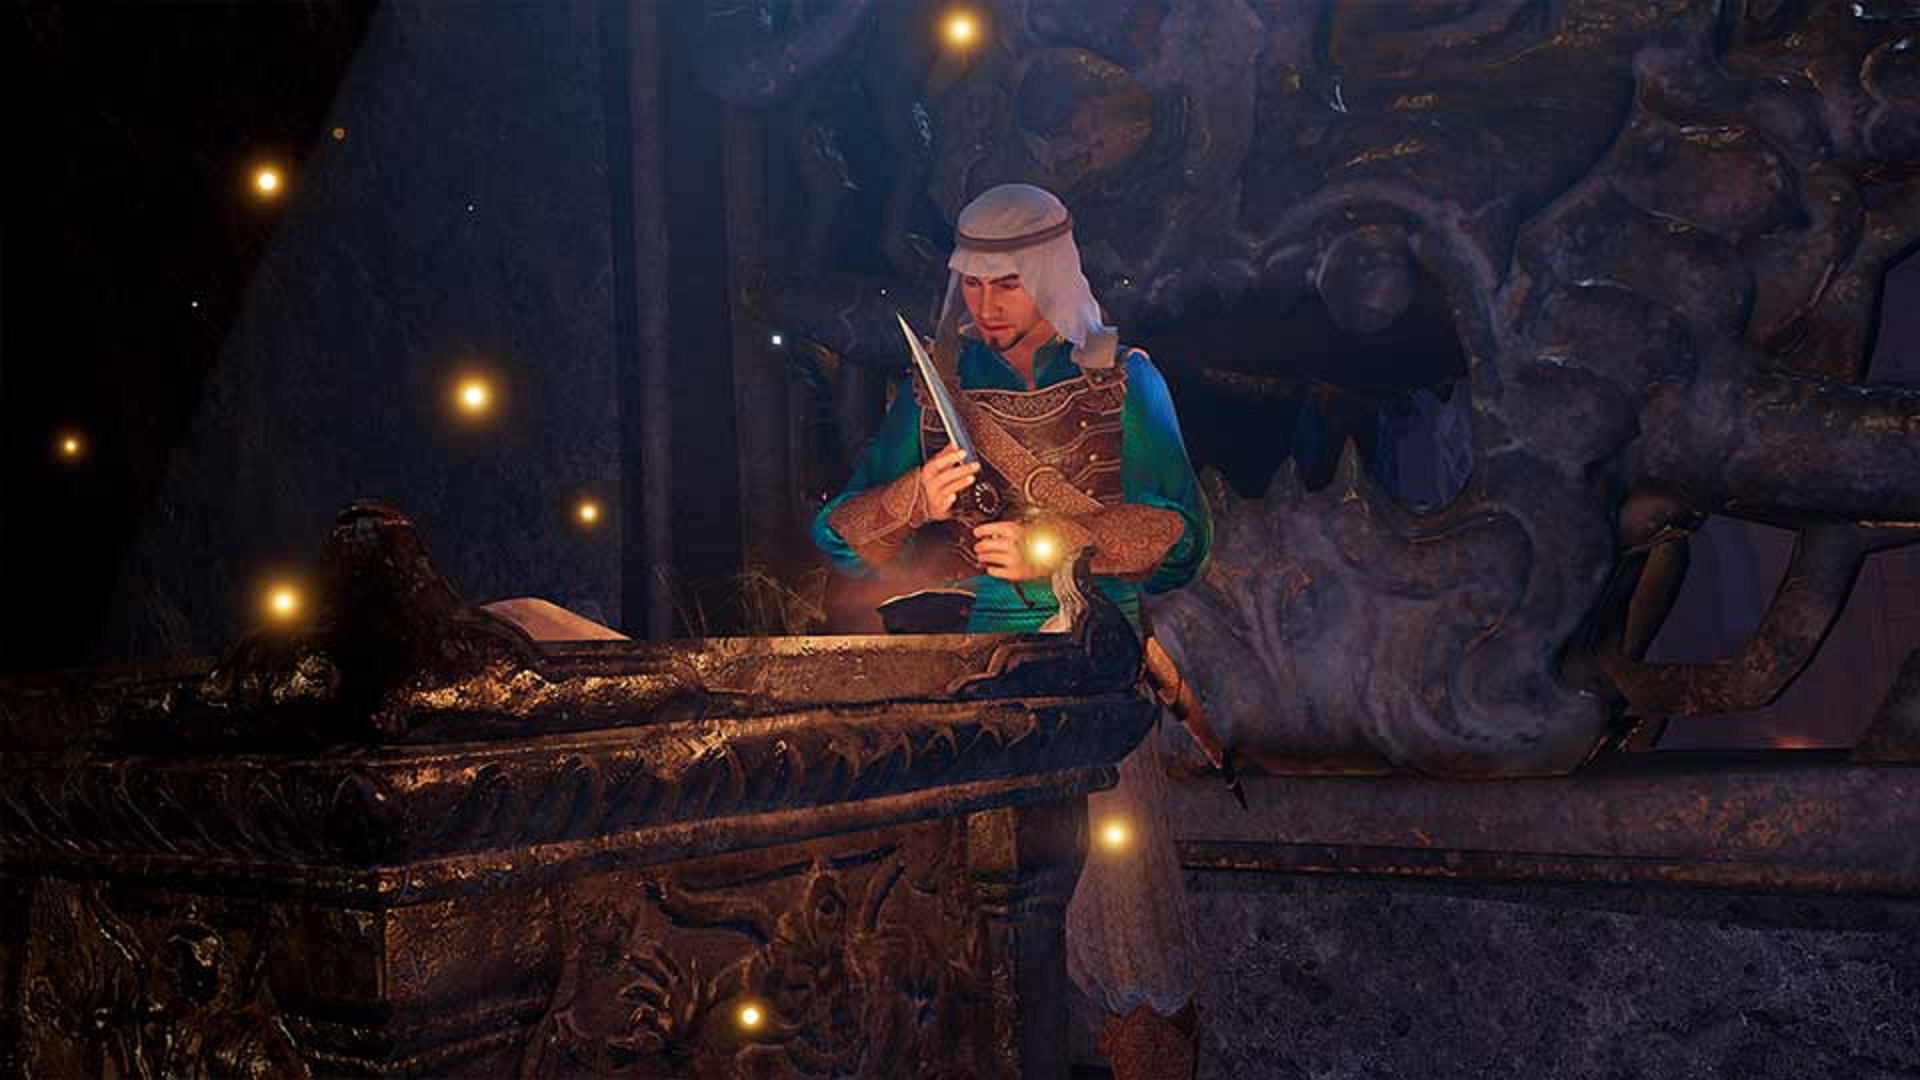 Prince Of Persia The Sands Of Time Remake Image 6